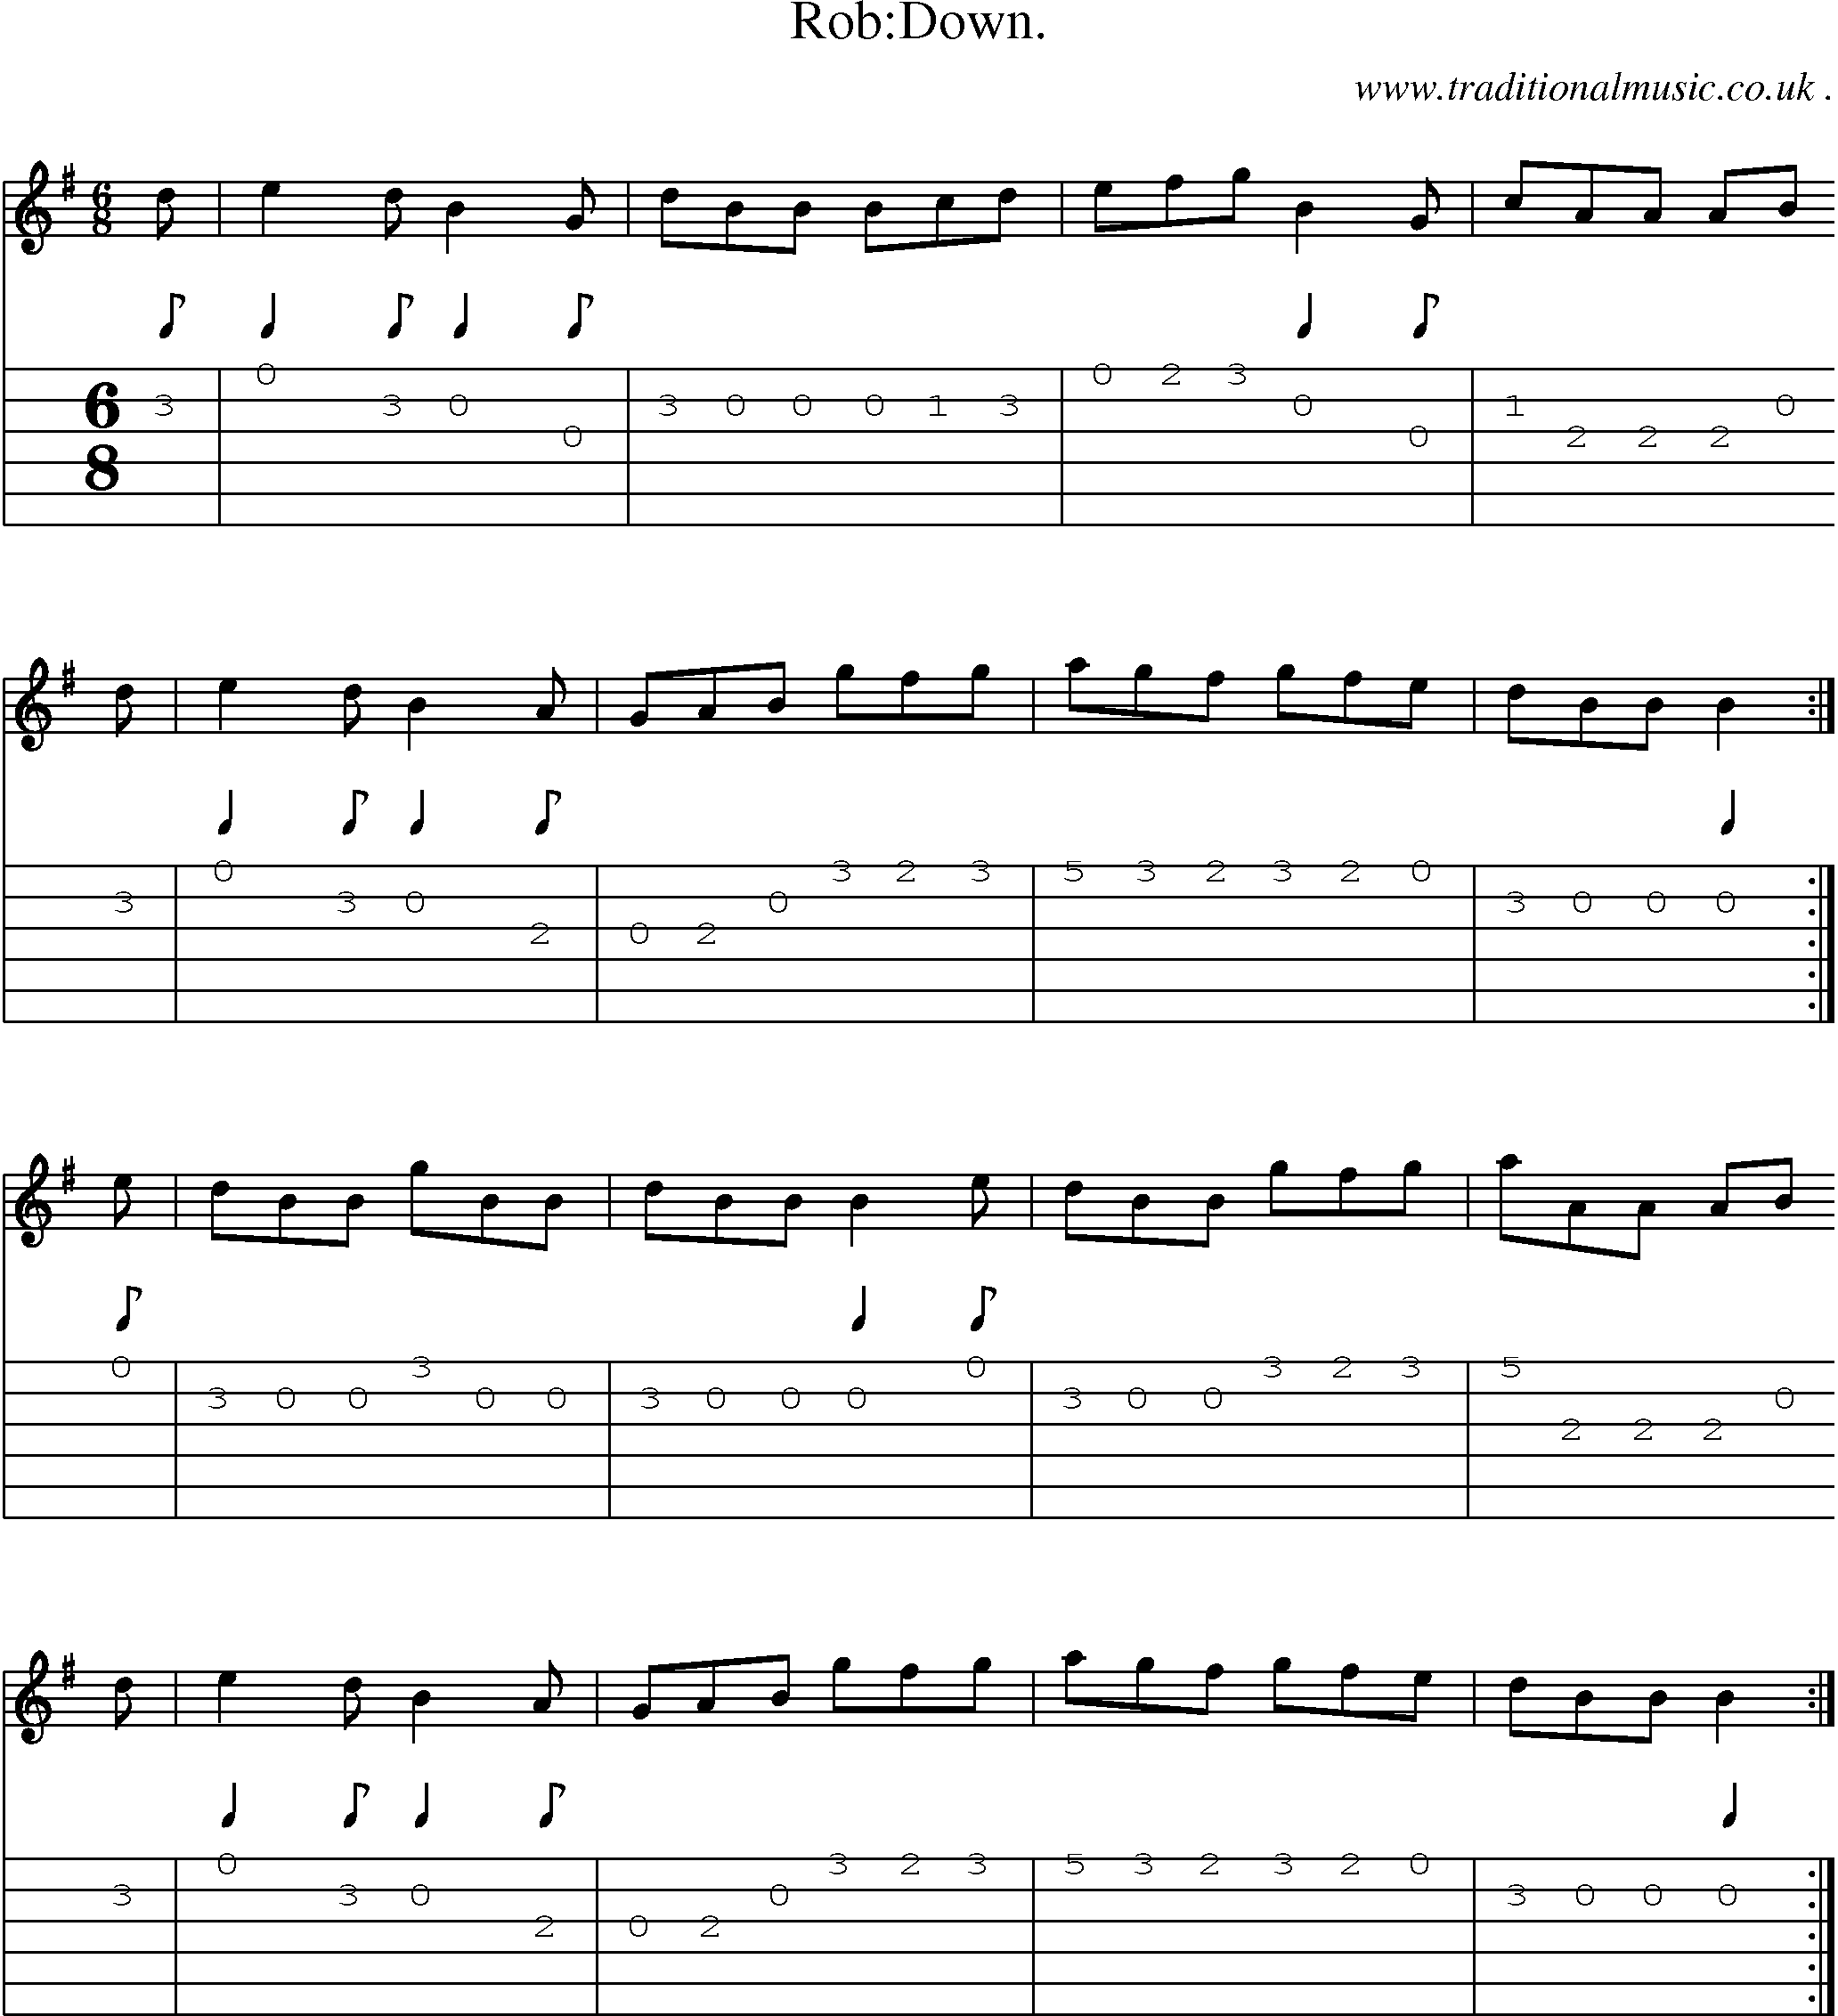 Sheet-Music and Guitar Tabs for Robdown